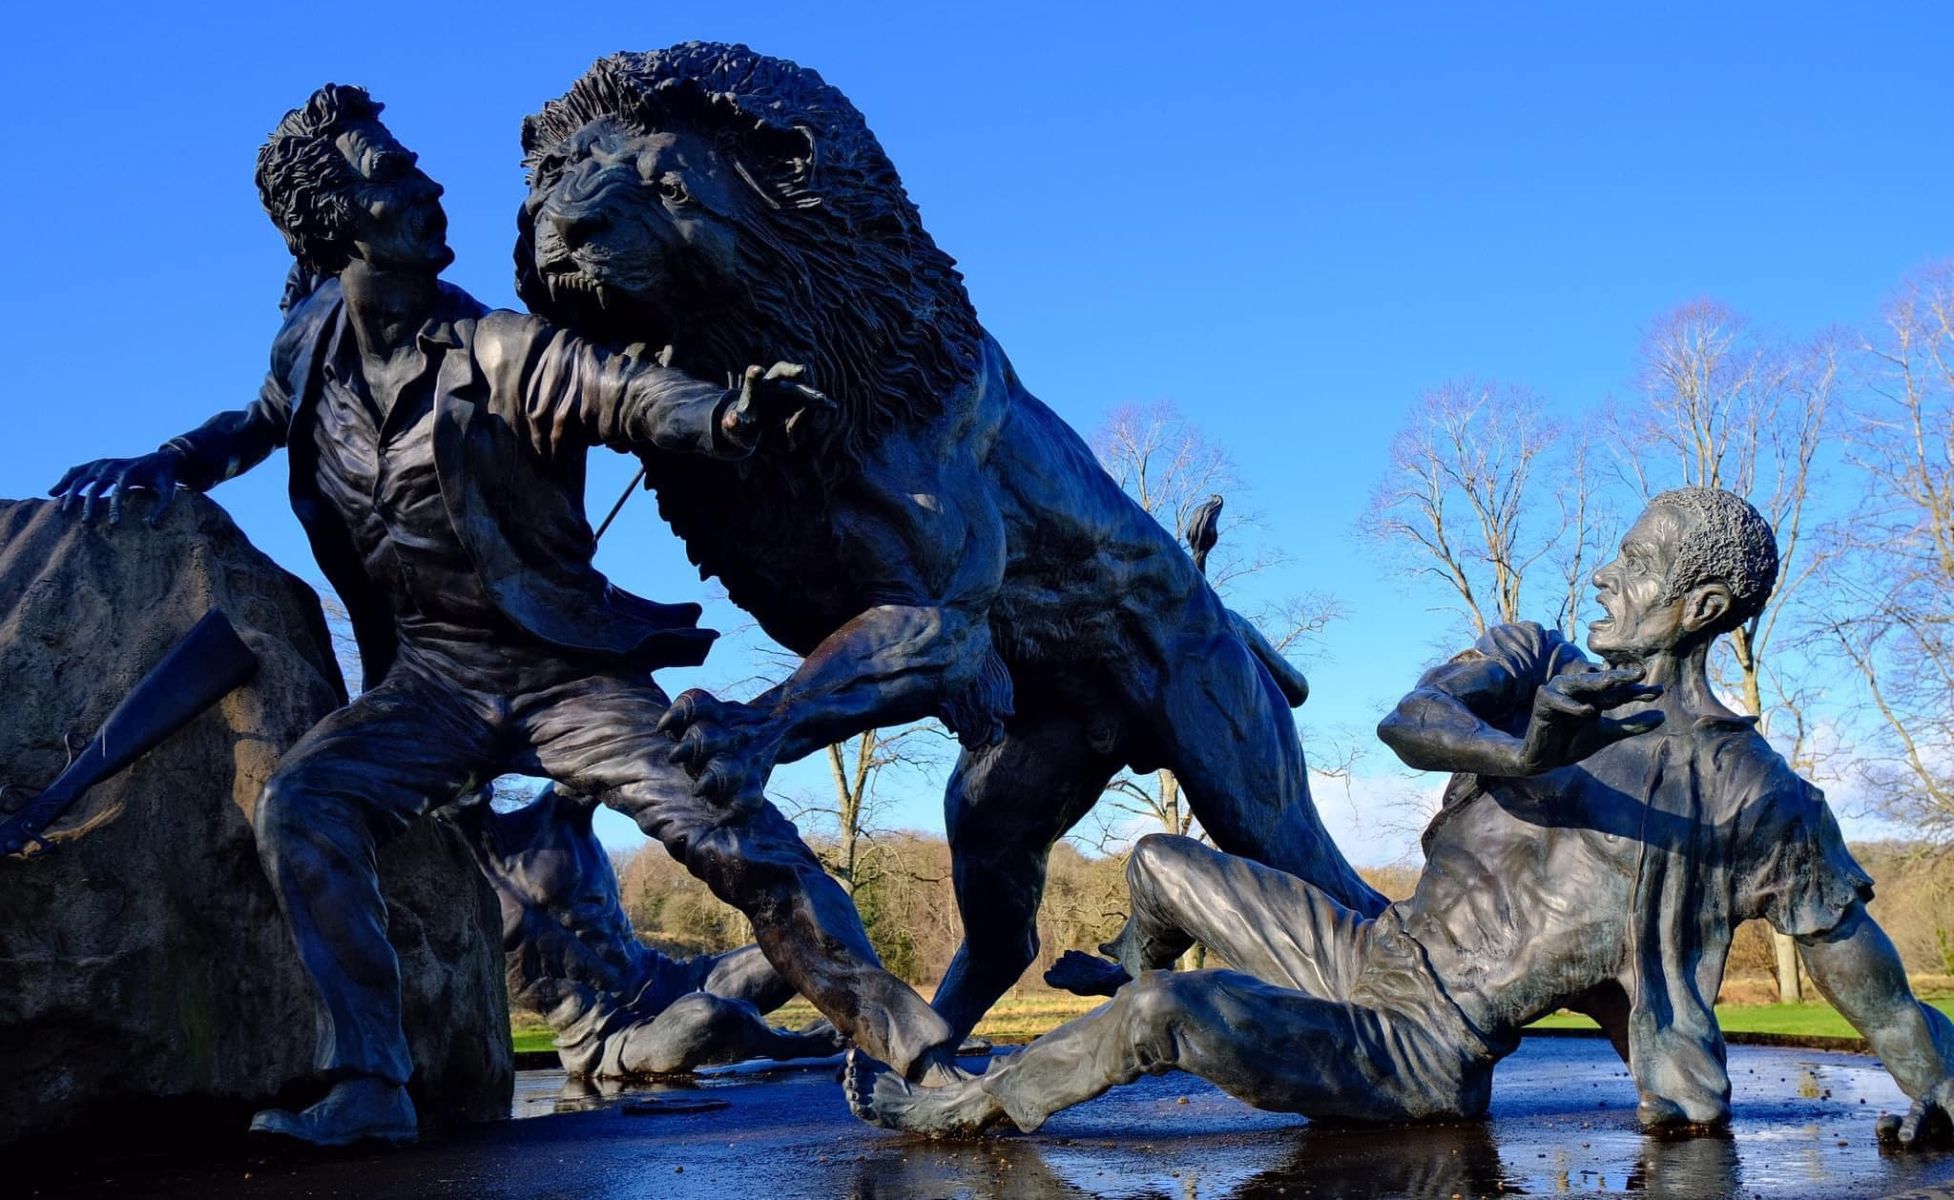 Lion Attack Monument at the David Livingstone Memorial Centre in Blantyre